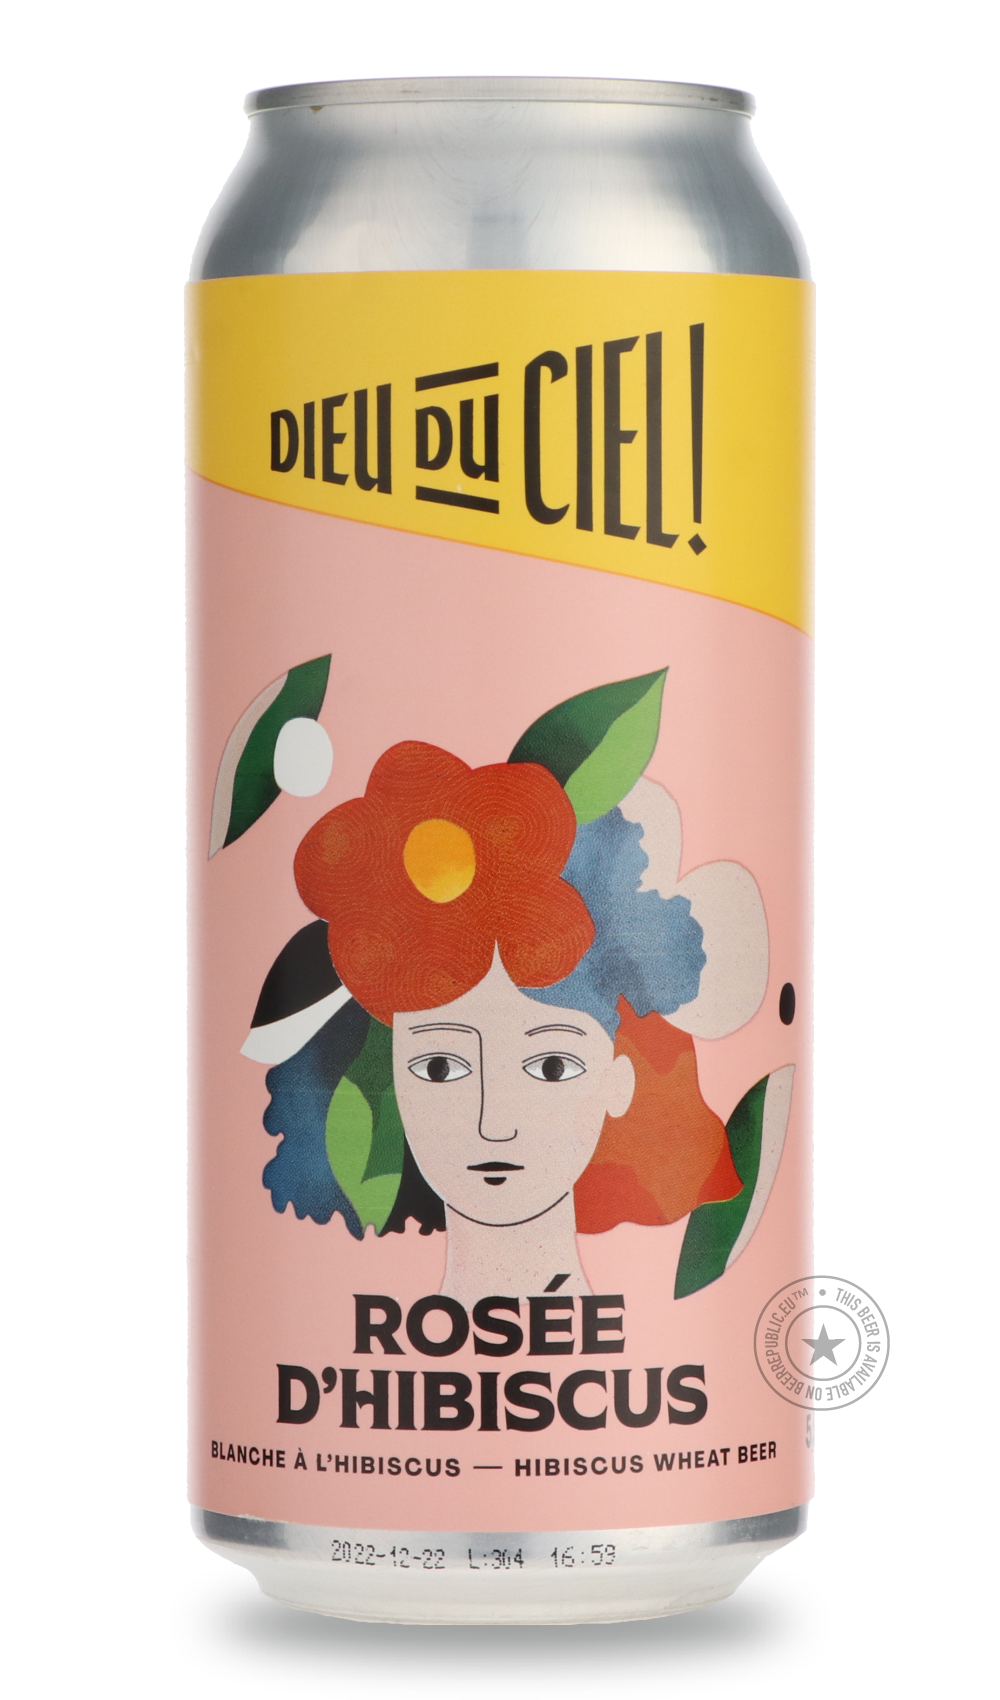 -Dieu du Ciel- Rosée d'Hibiscus-Pale- Only @ Beer Republic - The best online beer store for American & Canadian craft beer - Buy beer online from the USA and Canada - Bier online kopen - Amerikaans bier kopen - Craft beer store - Craft beer kopen - Amerikanisch bier kaufen - Bier online kaufen - Acheter biere online - IPA - Stout - Porter - New England IPA - Hazy IPA - Imperial Stout - Barrel Aged - Barrel Aged Imperial Stout - Brown - Dark beer - Blond - Blonde - Pilsner - Lager - Wheat - Weizen - Amber - 